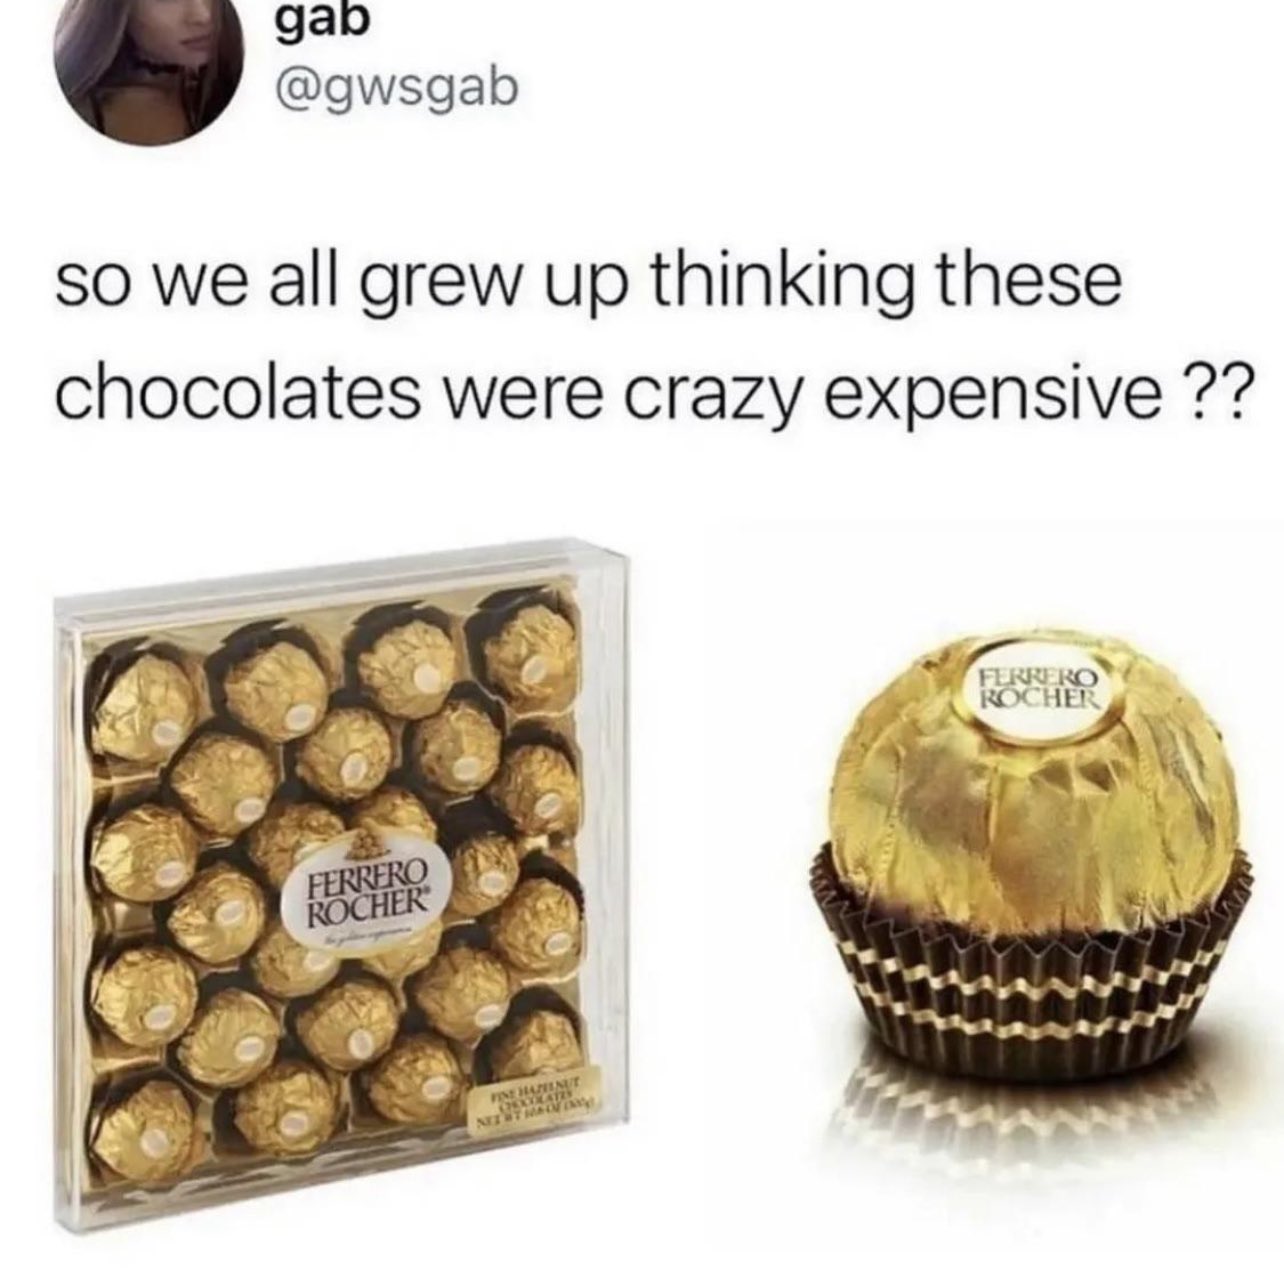 internet hall of  fame - gab so we all grew up thinking these chocolates were crazy expensive ?? Ferrero Rocher Fine Nit Ferrero Rocher